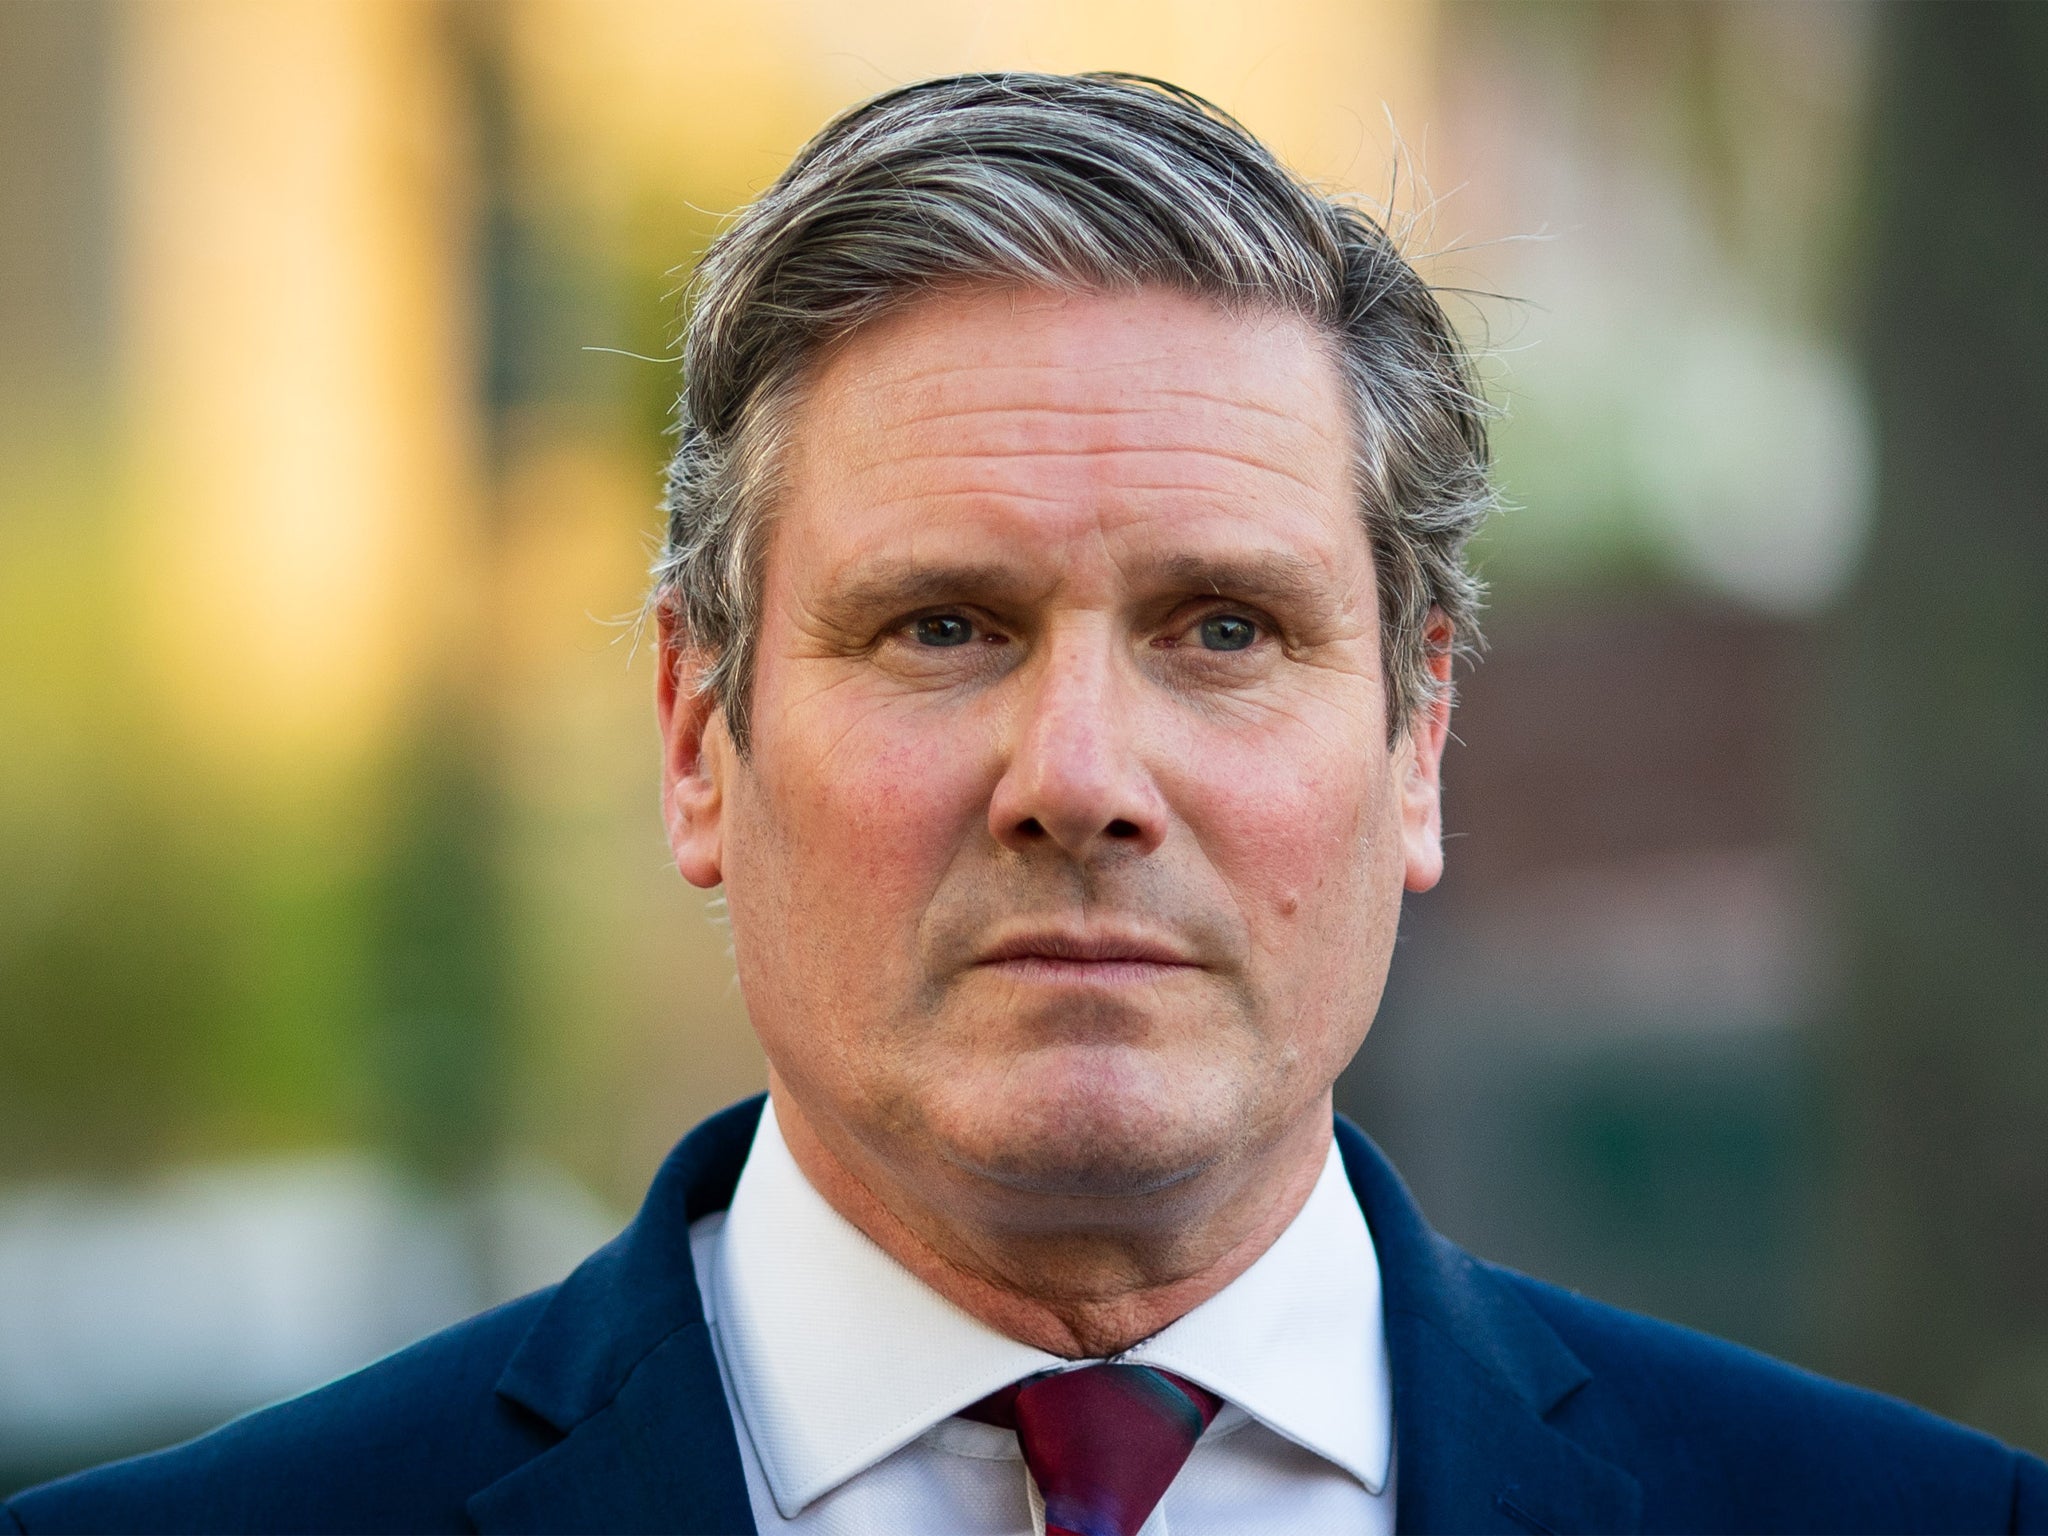 Keir Starmer’s poll ratings are in the negatives.